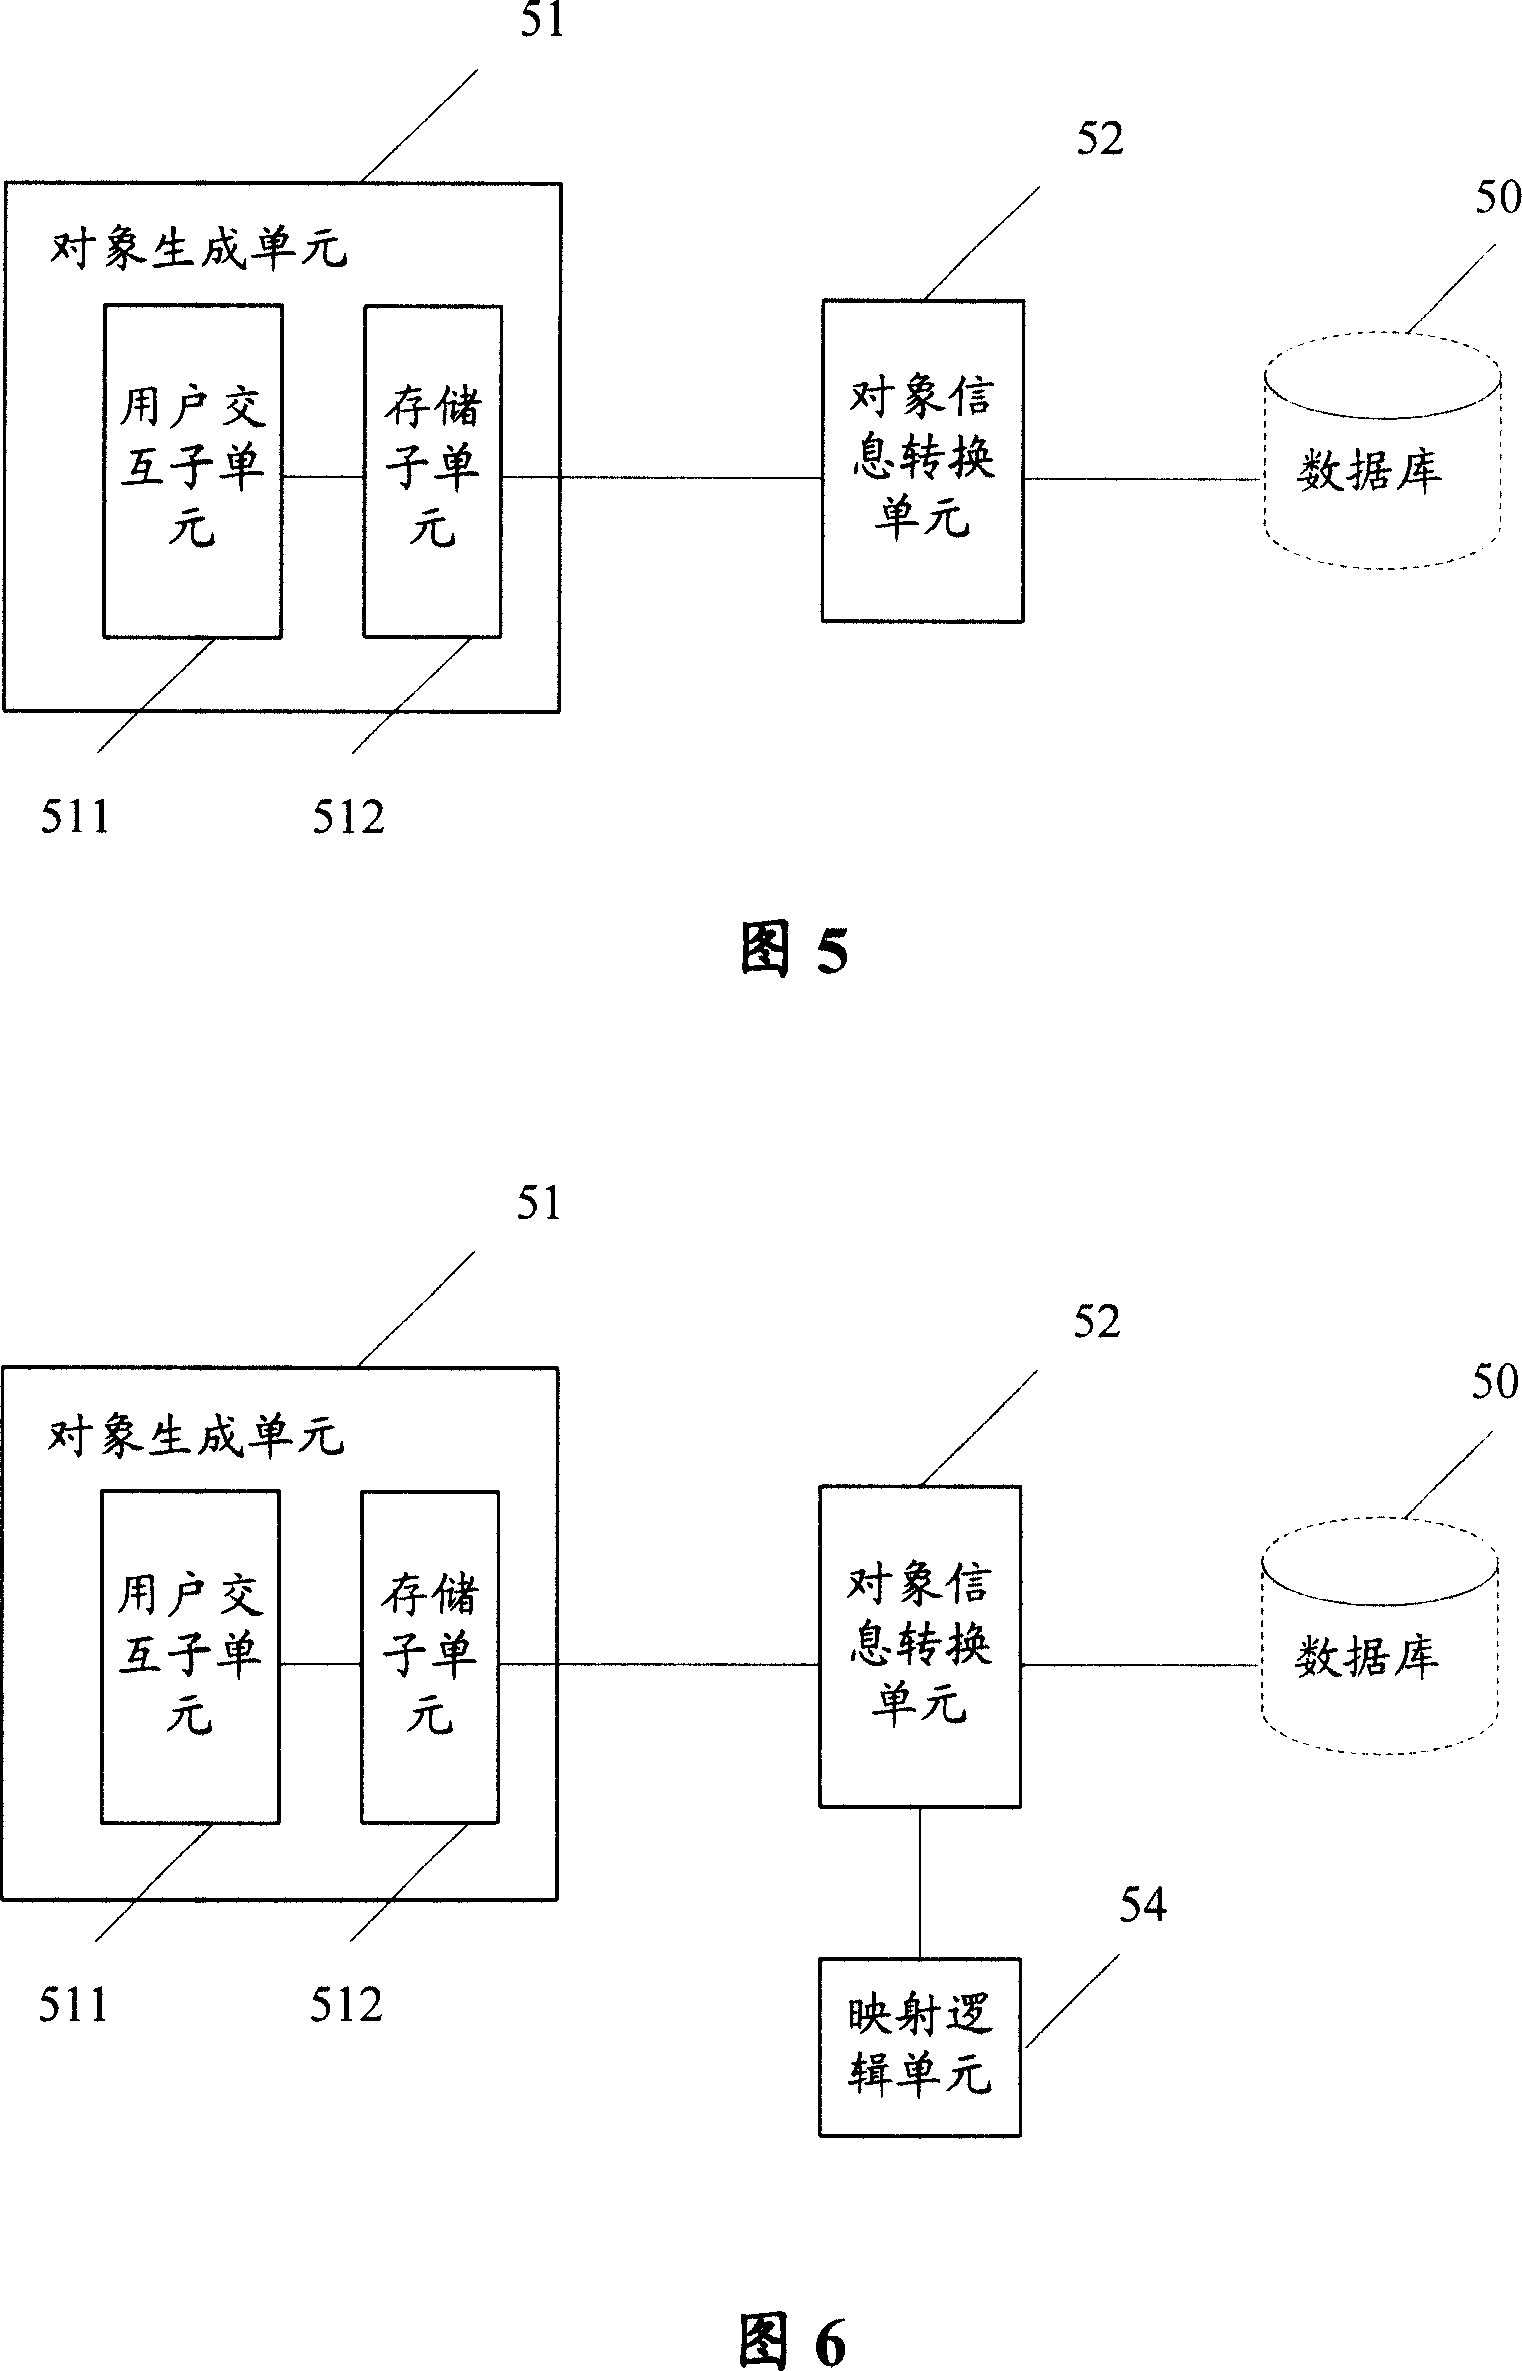 Method and apparatus for updating object local attribute to related data bank